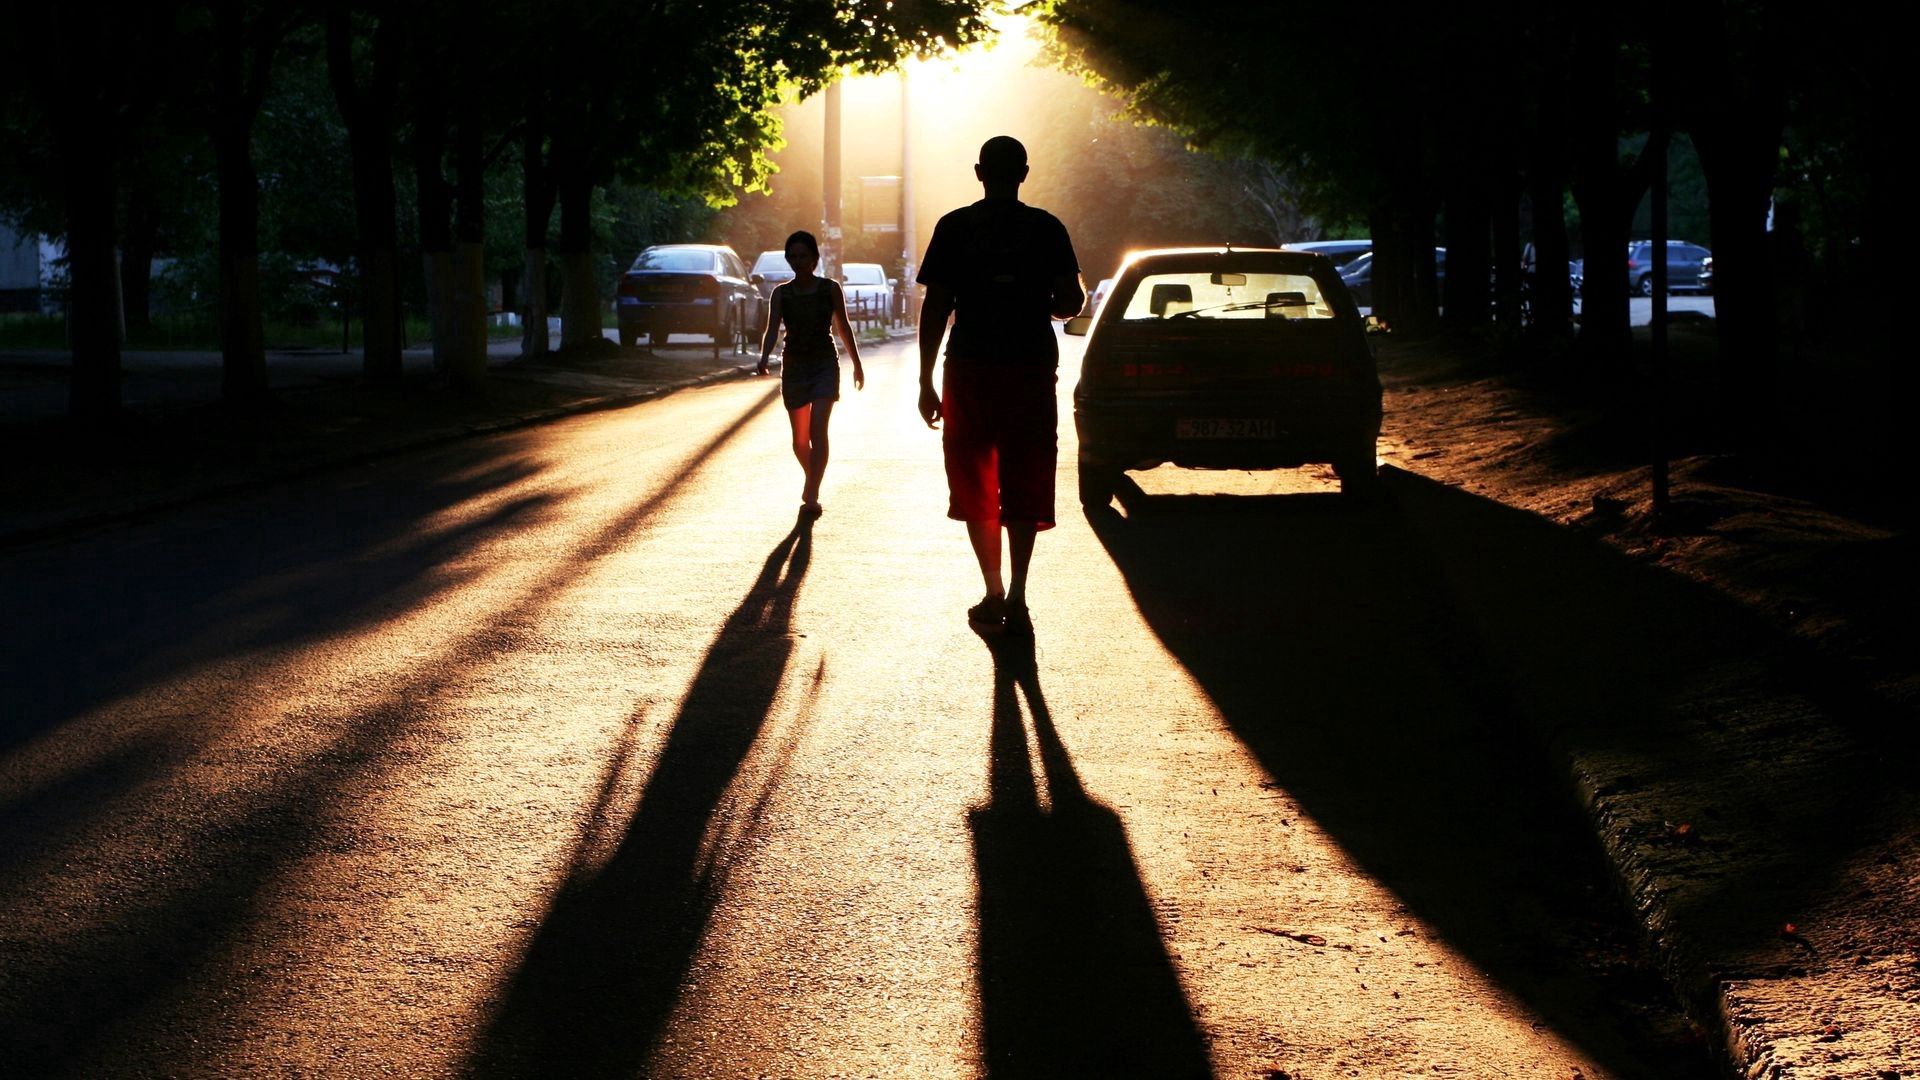 PC Wallpapers people, cars, miscellanea, miscellaneous, road, silhouettes, shadow, evening